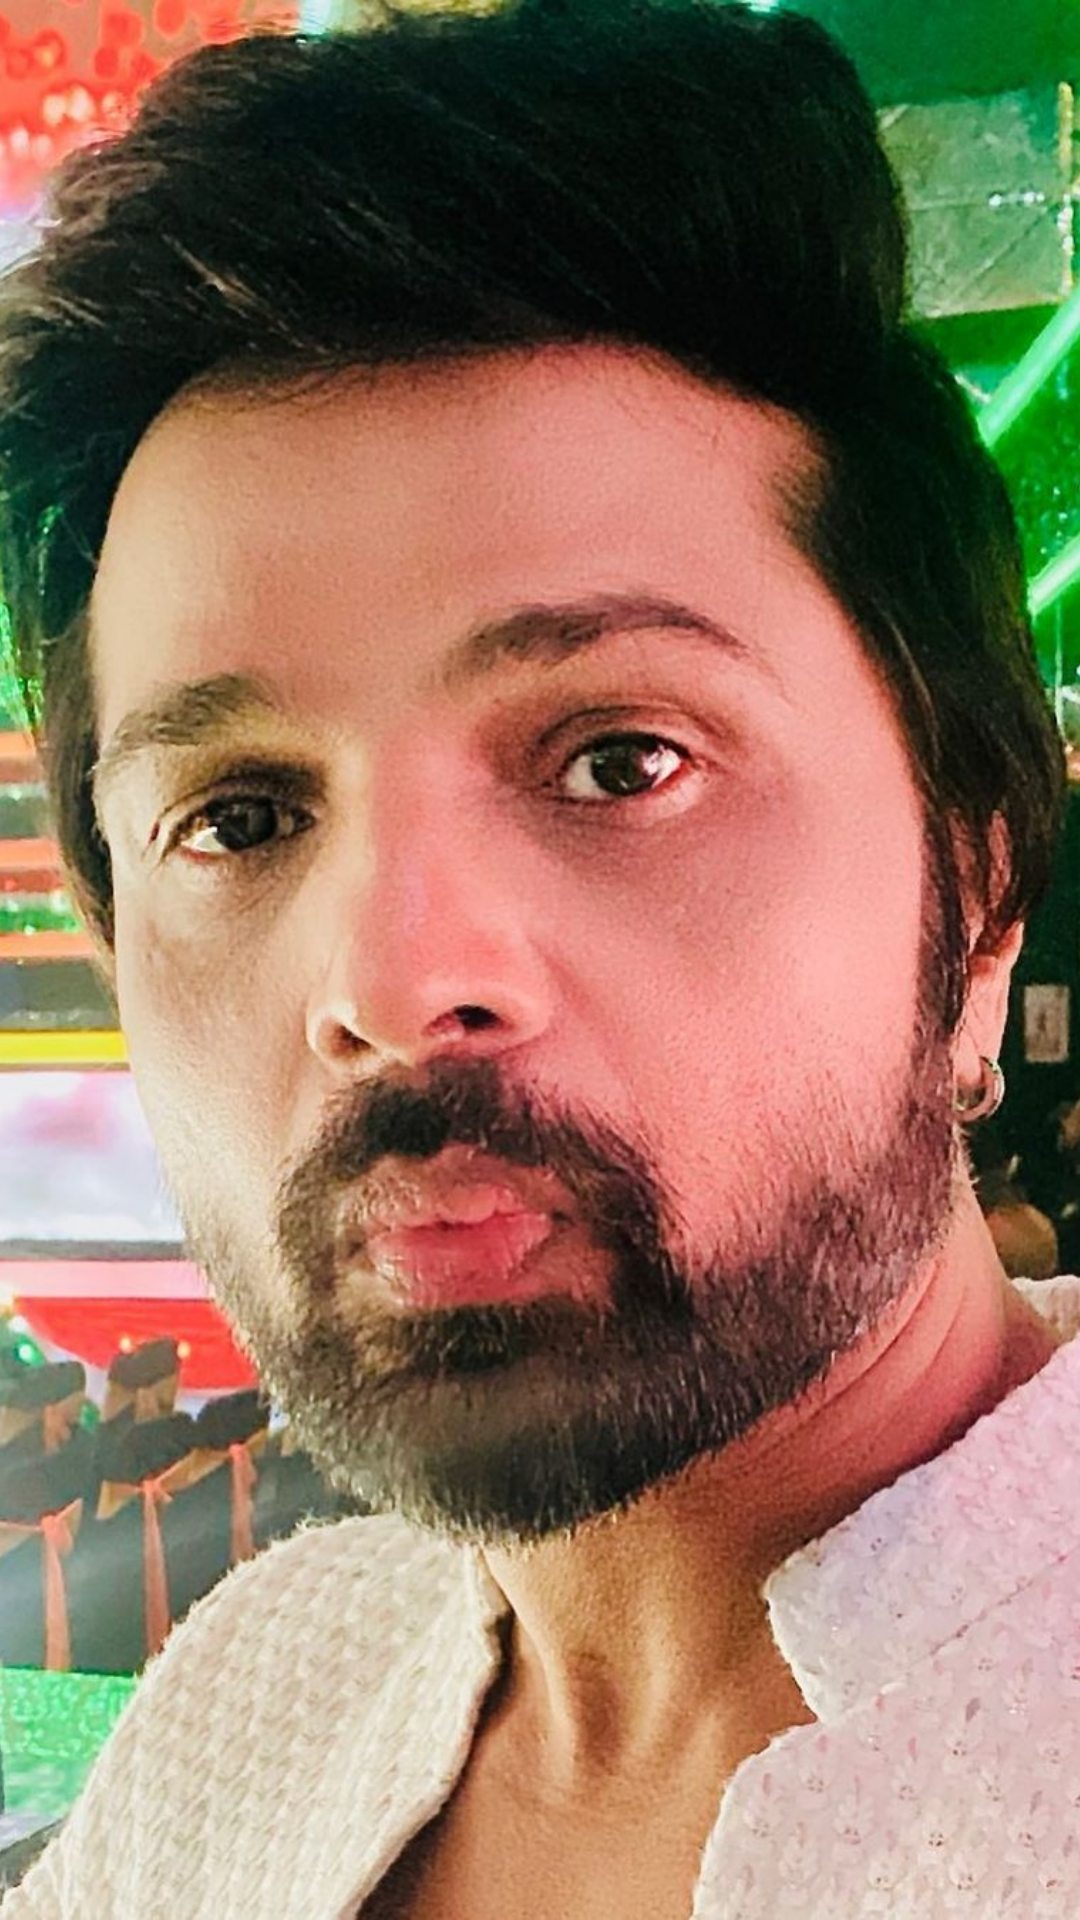 How Himesh reduced 20 kg weight with vegetarian food?